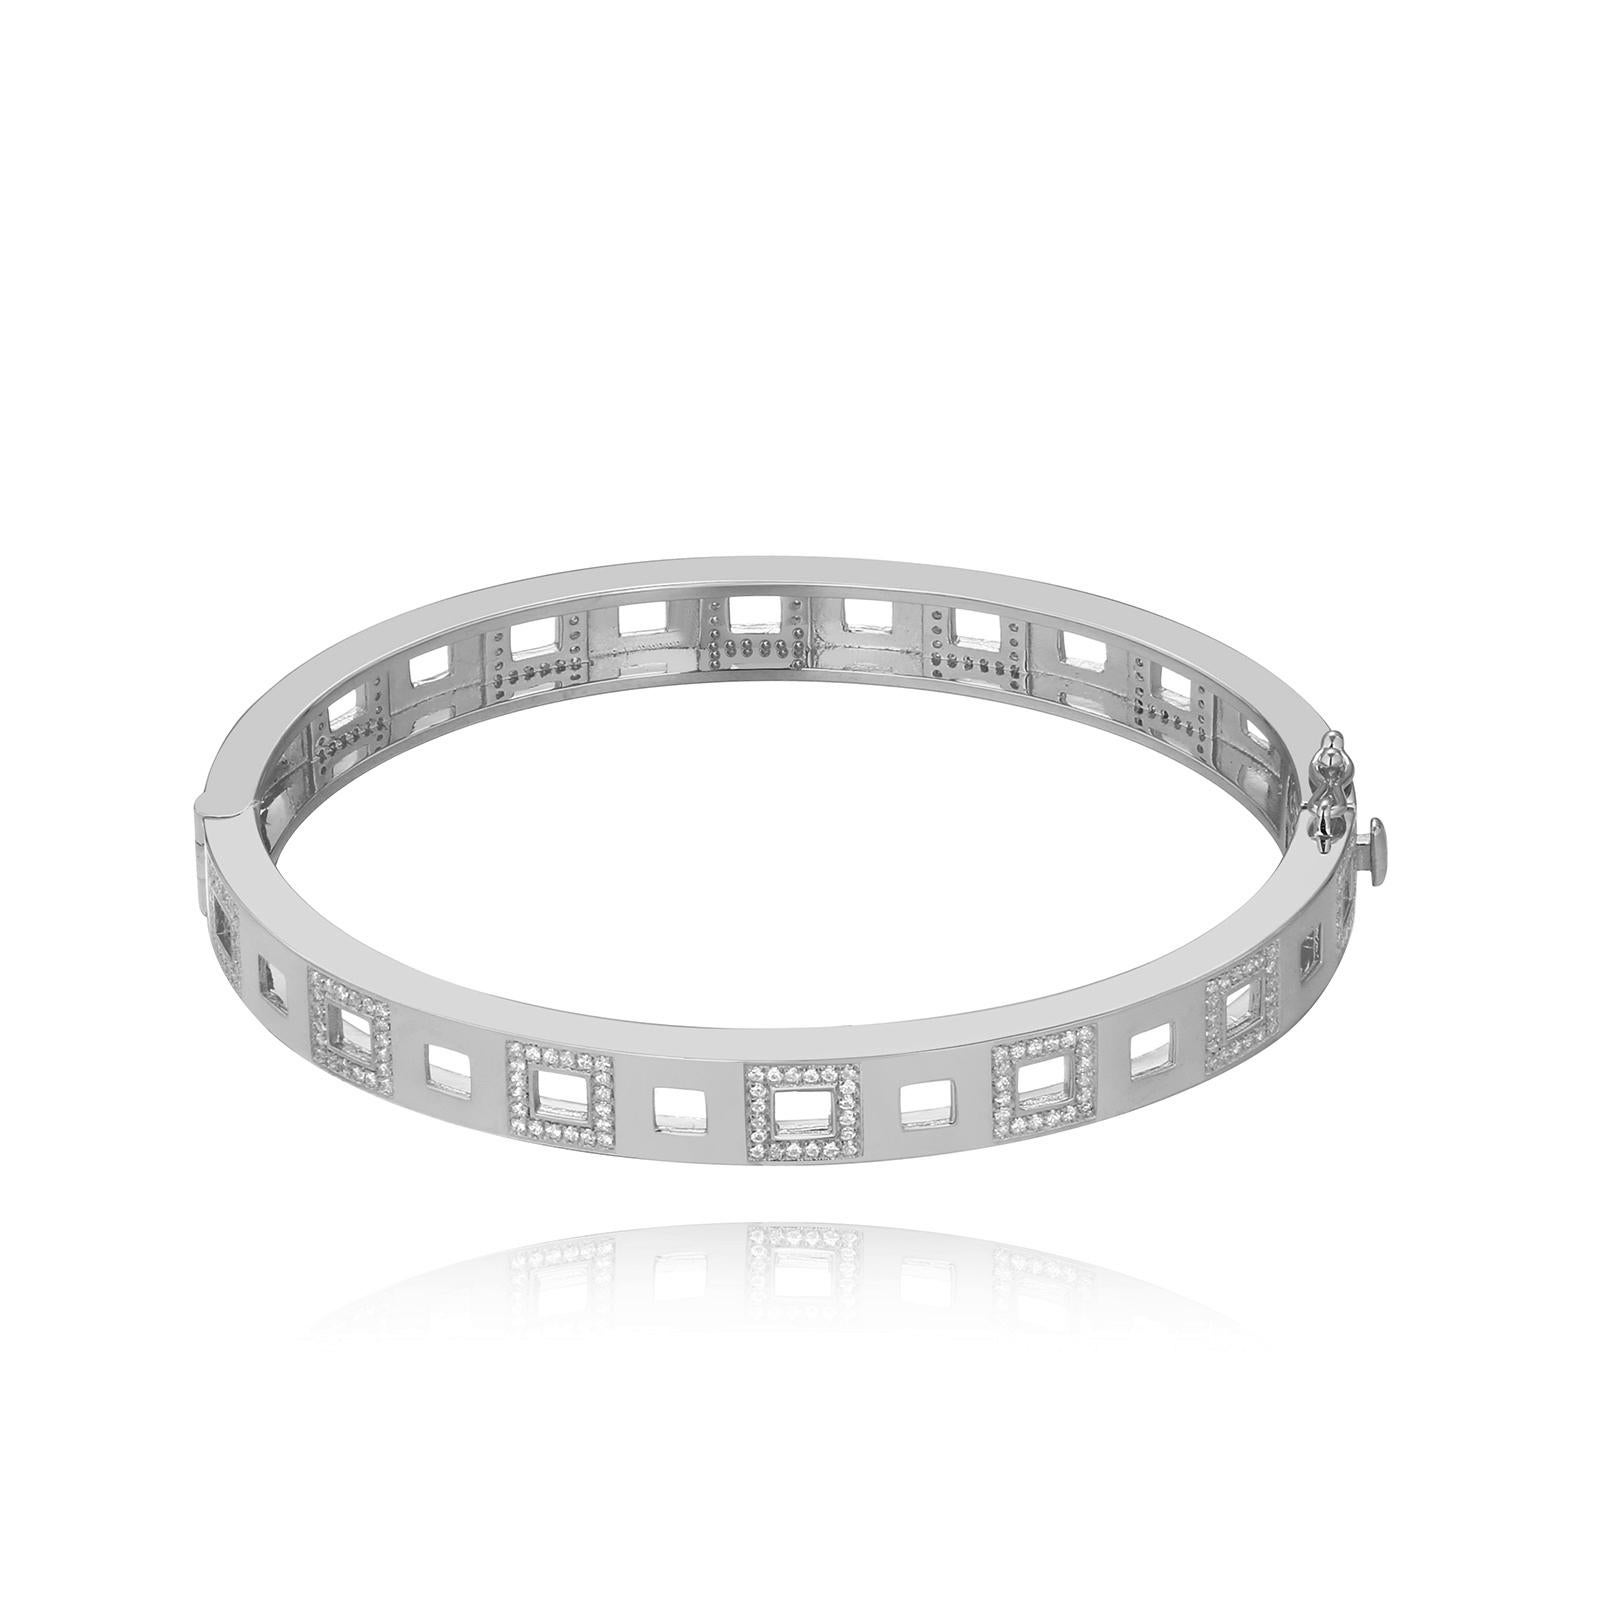 We are fierce and bold. This open square pave bangle is your perfect antedote for any style you choose.  Perfectly transcendable day and night and a staple piece for all times. .925 sterling silver base.  Also available in sterling silver and 24k